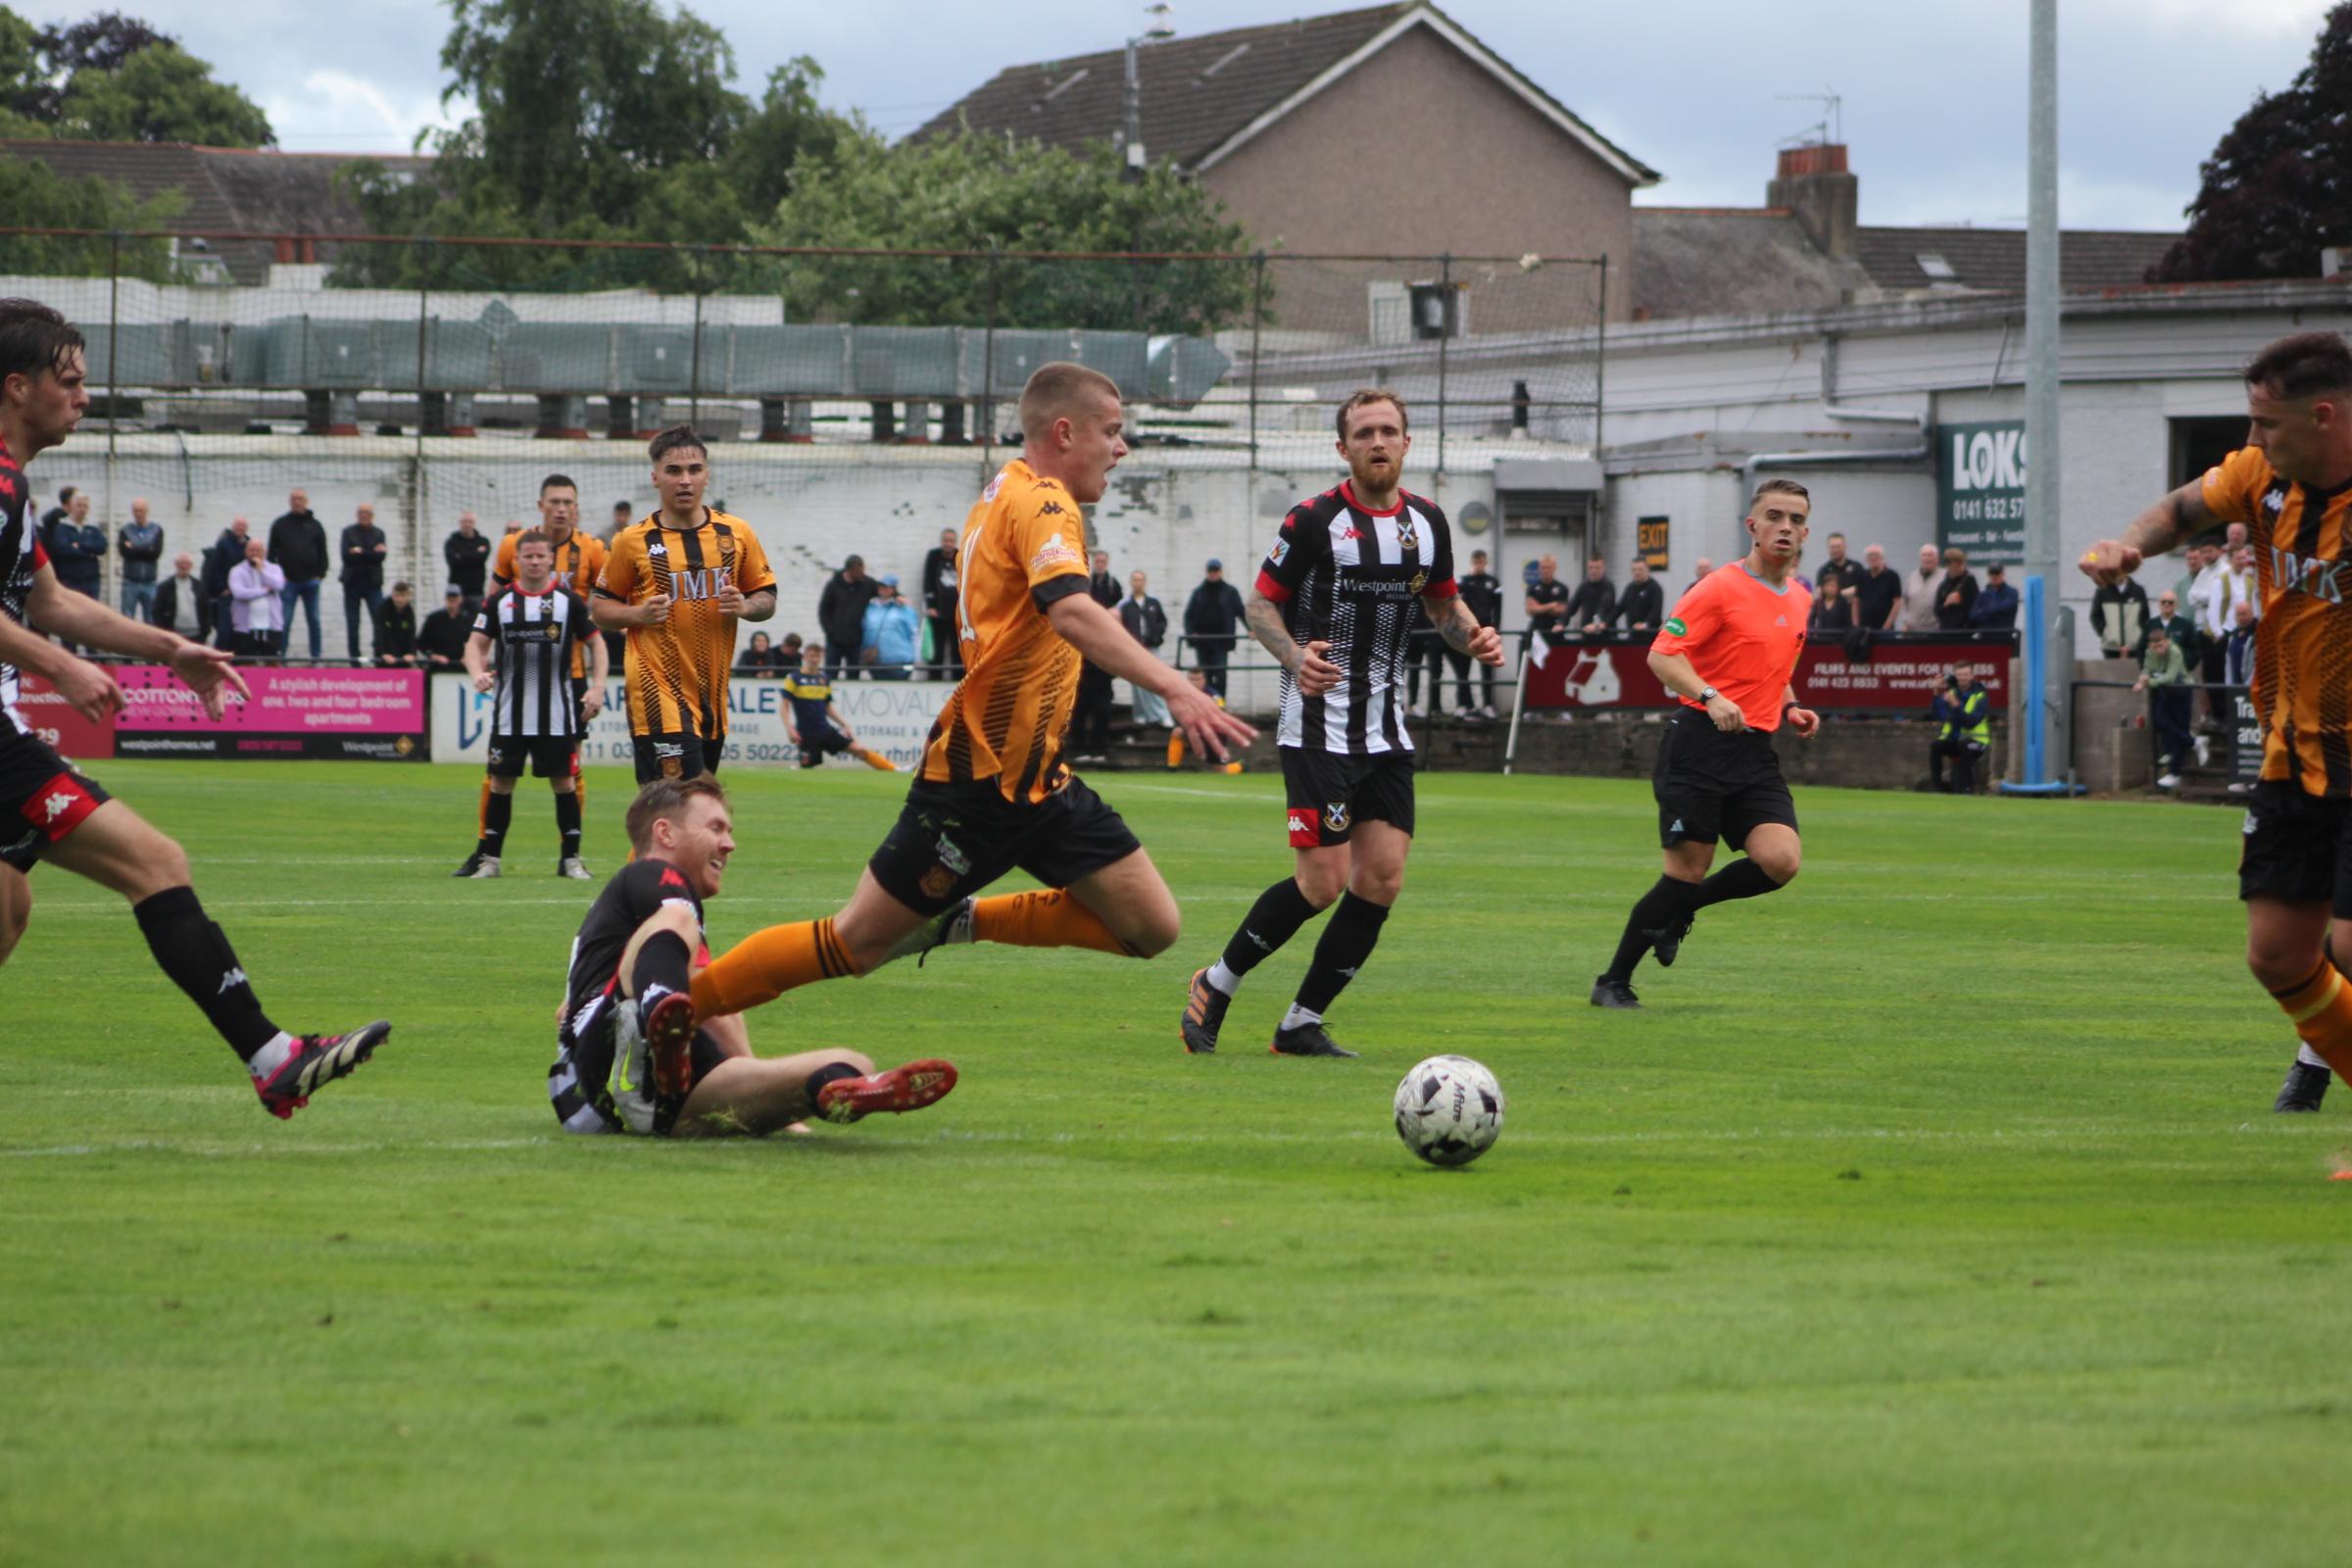 Ewan Thomson tumbles under a challenge from Ross Lindsay during Talbot’s 1-0 loss to Pollok on Saturday - this photo suggests contact was made just outside the box, though referee Jamie Wilkie waved away the visitors’ appeals for either a